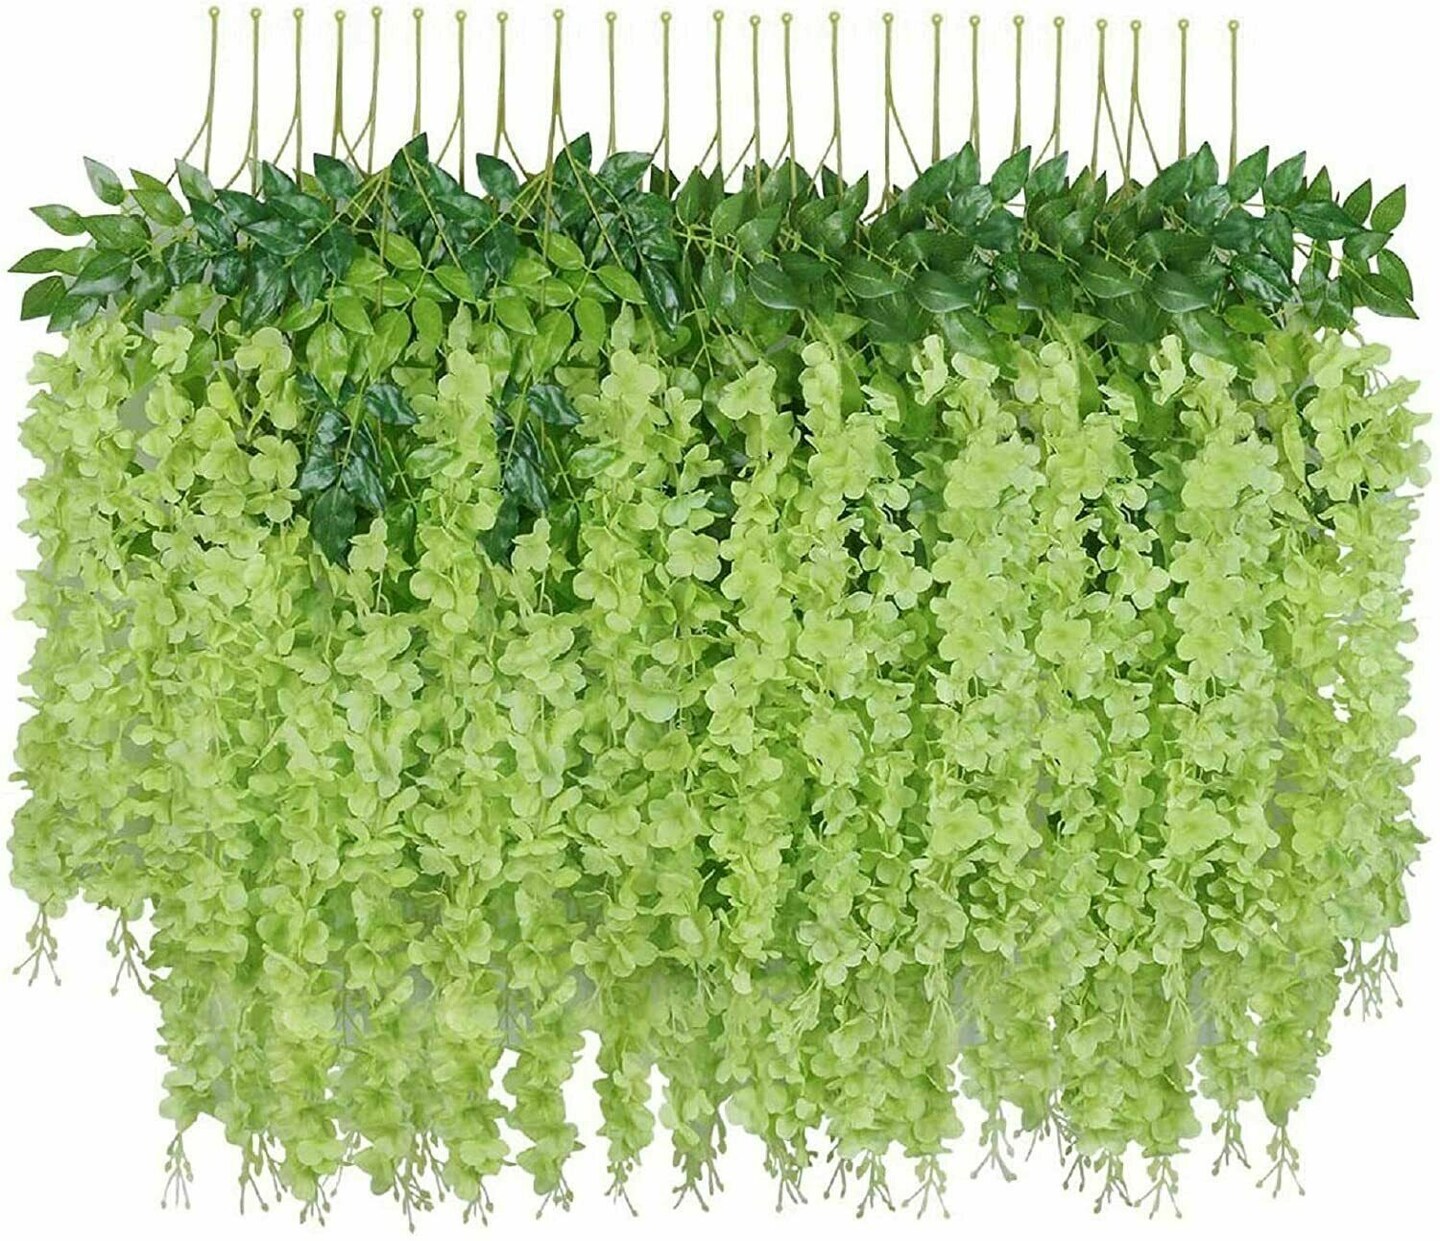 6ft Baby's Breath Garland by Ashland | Michaels